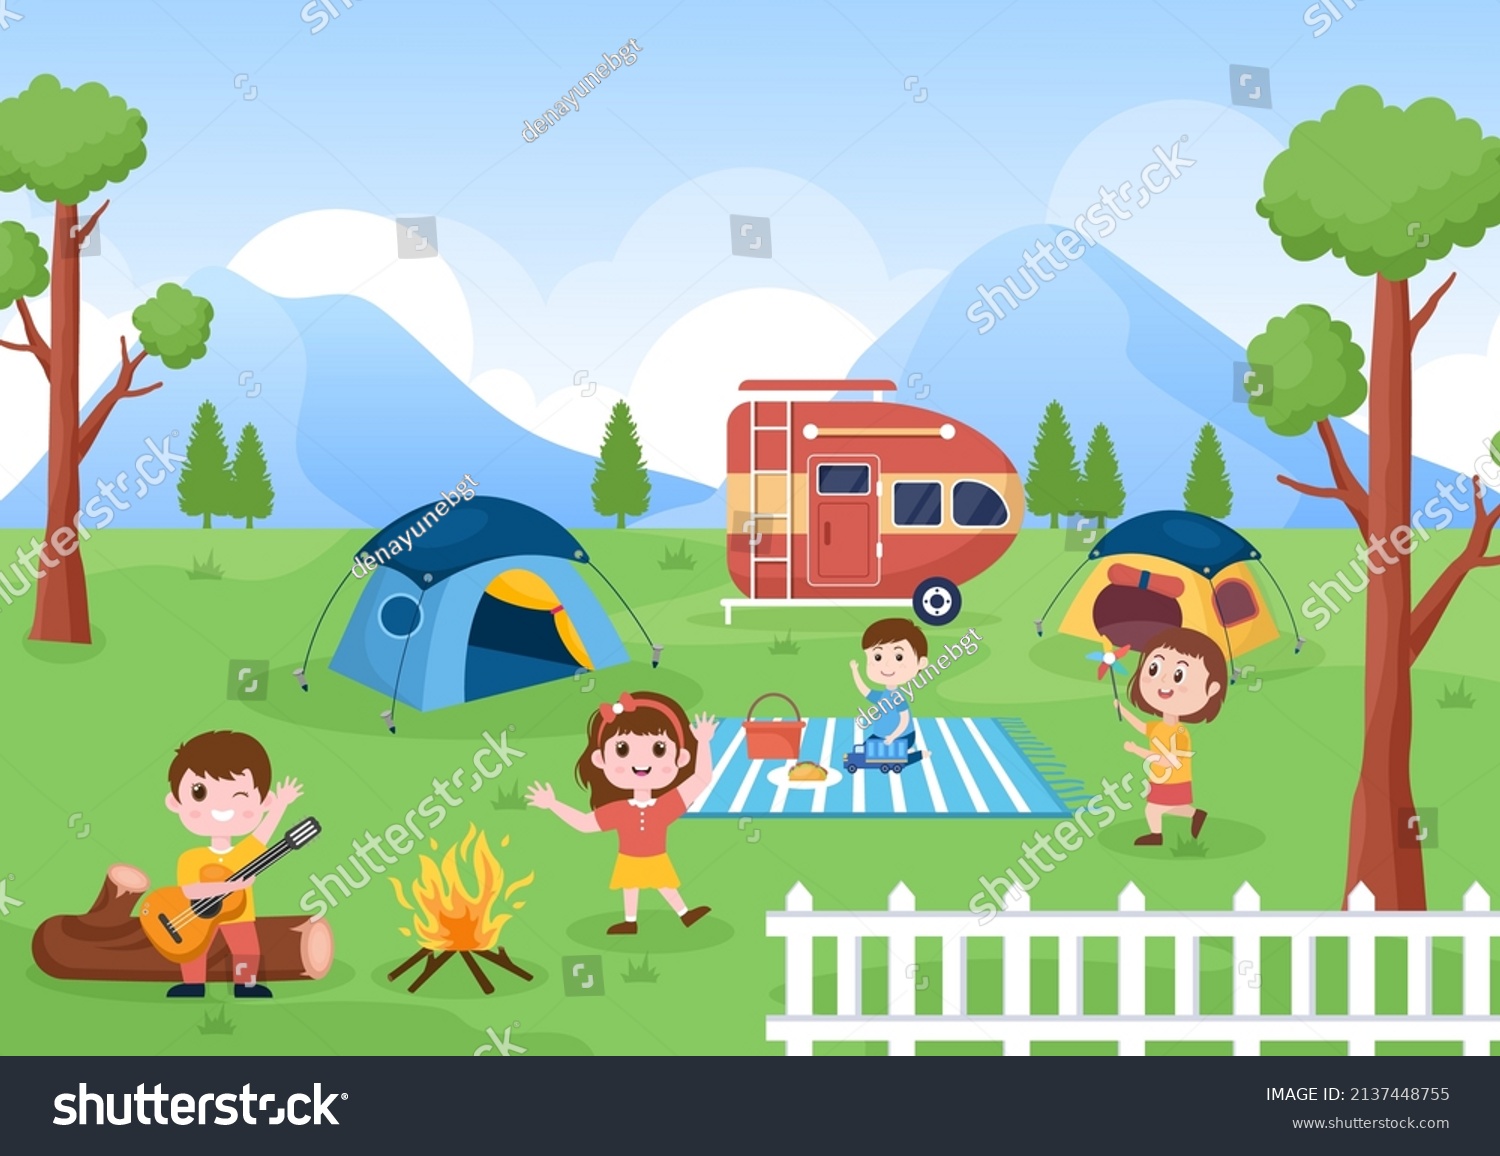 Camping Car Background Illustration Tent Camper Stock Vector (Royalty ...